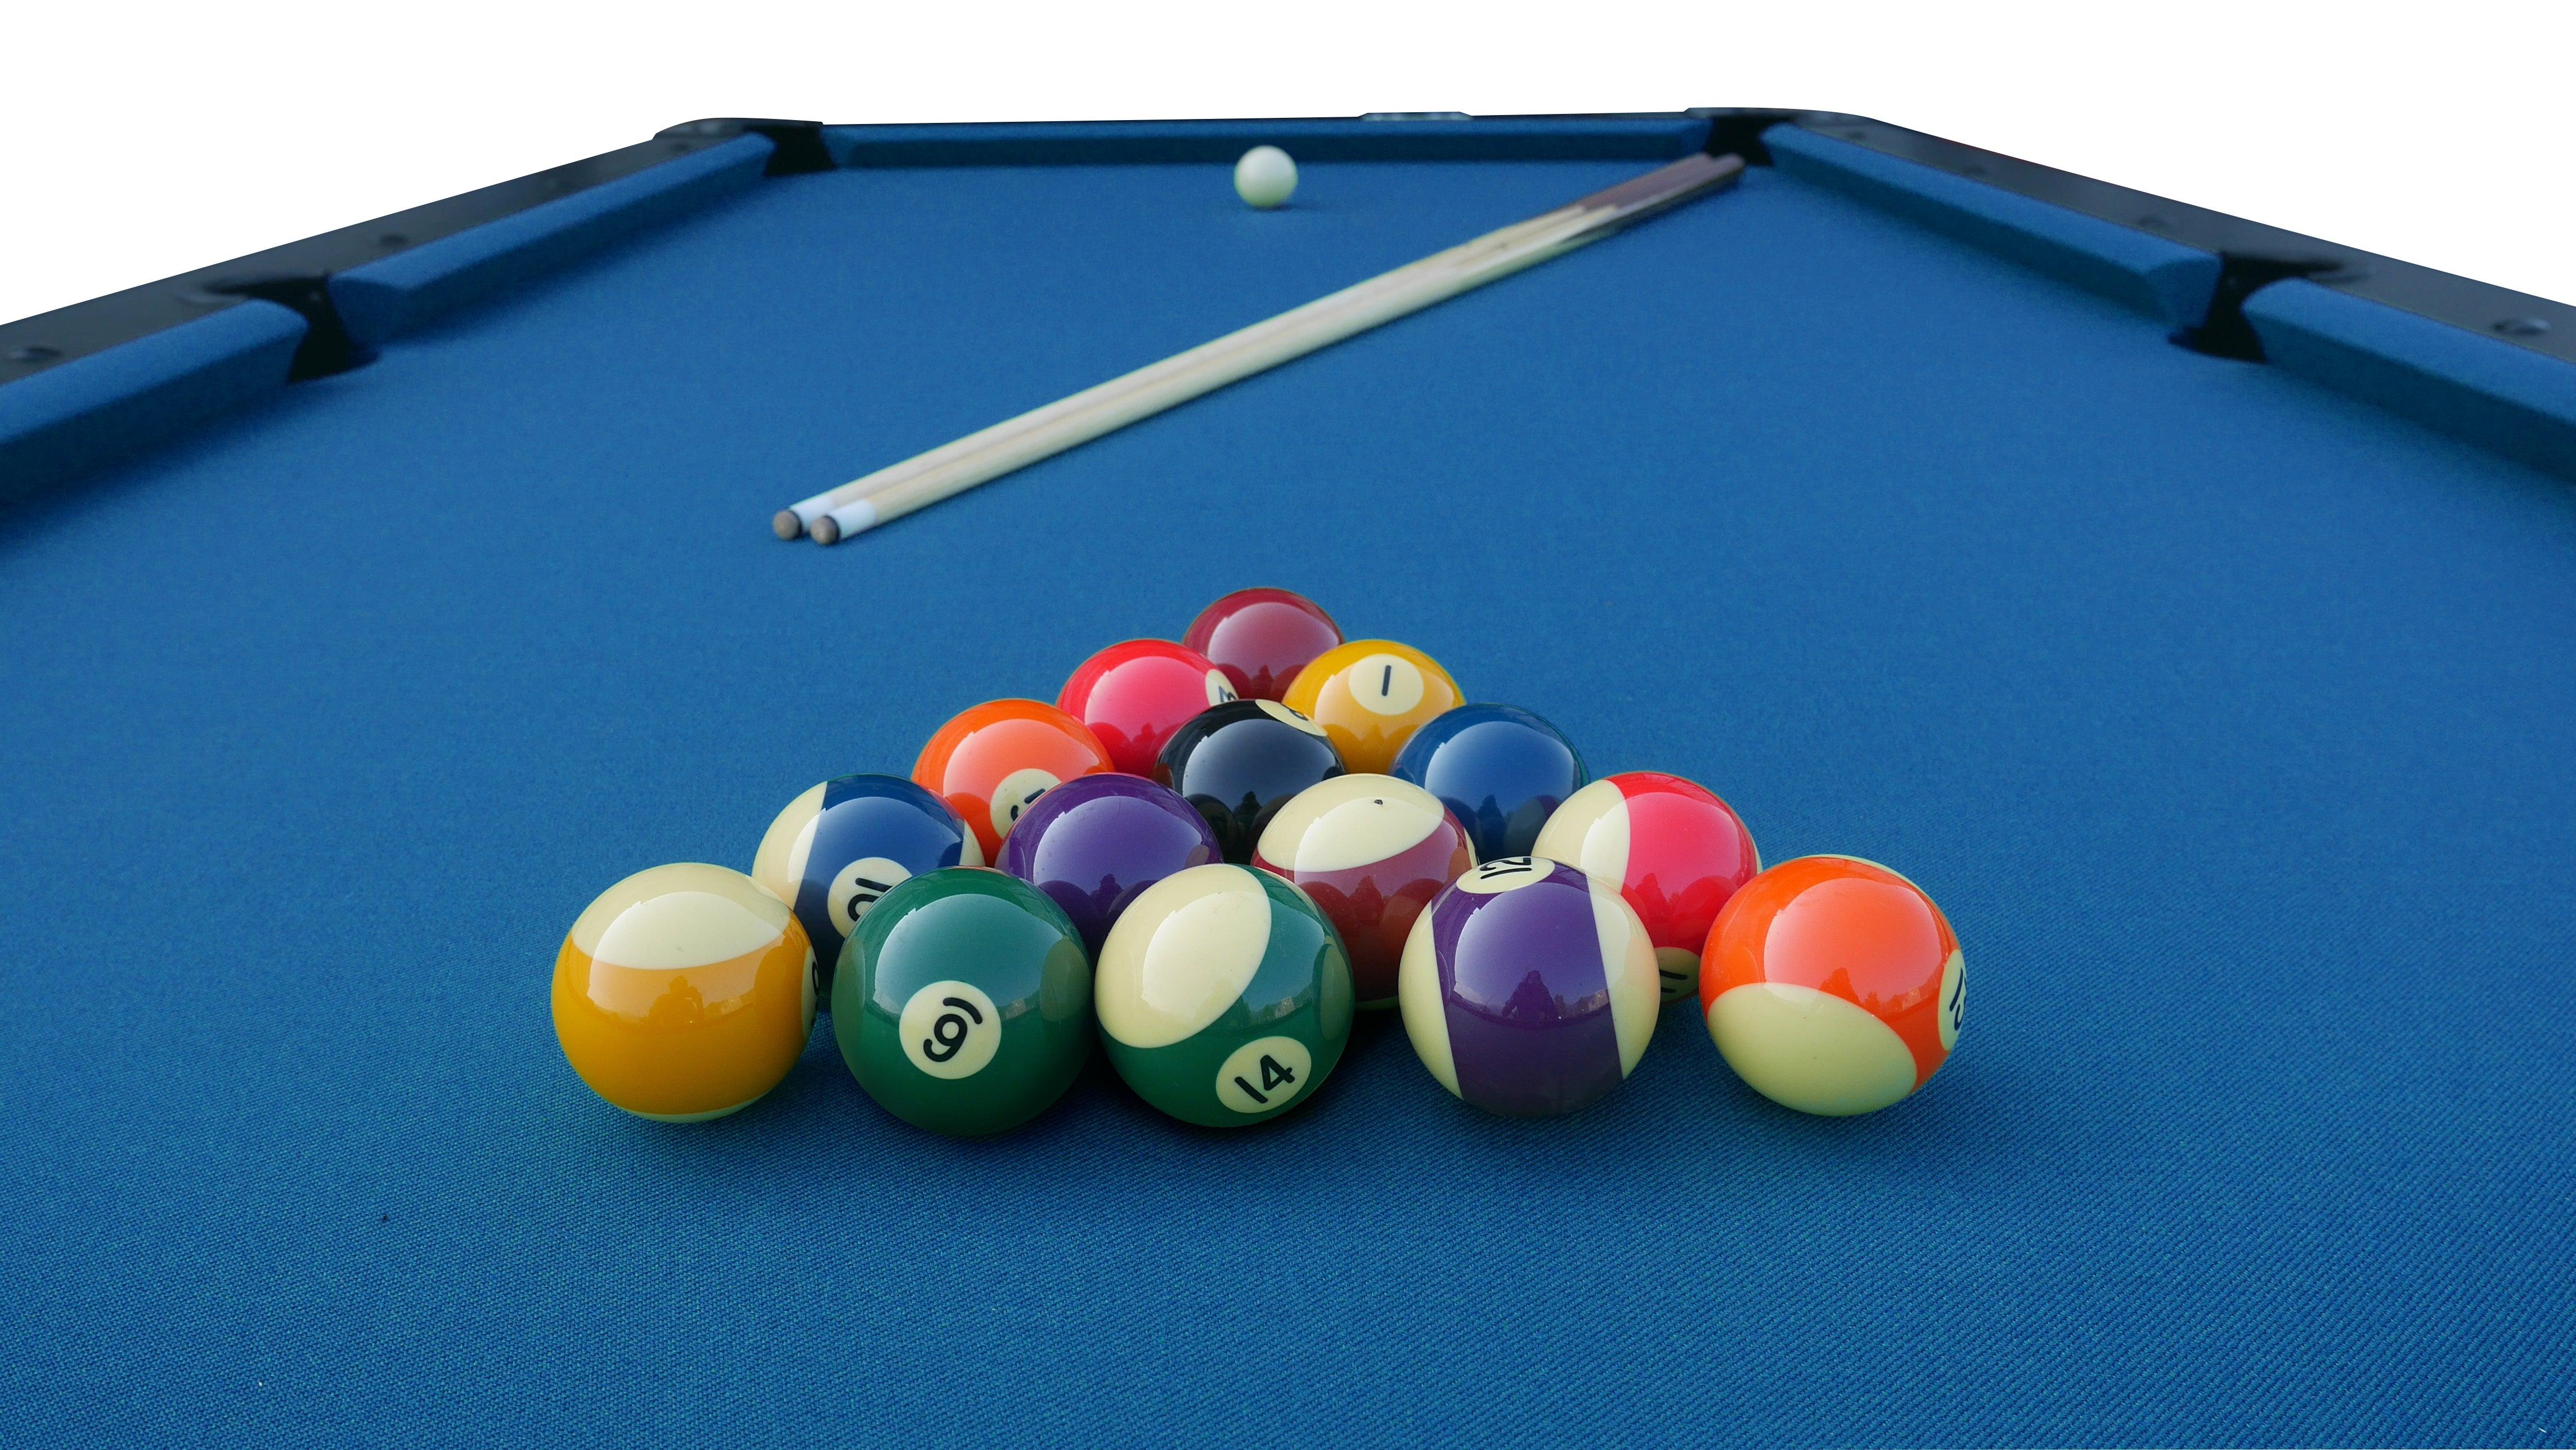 Roberto Sports First Pool 180 (6ft) Pool Table - Bassline Retail